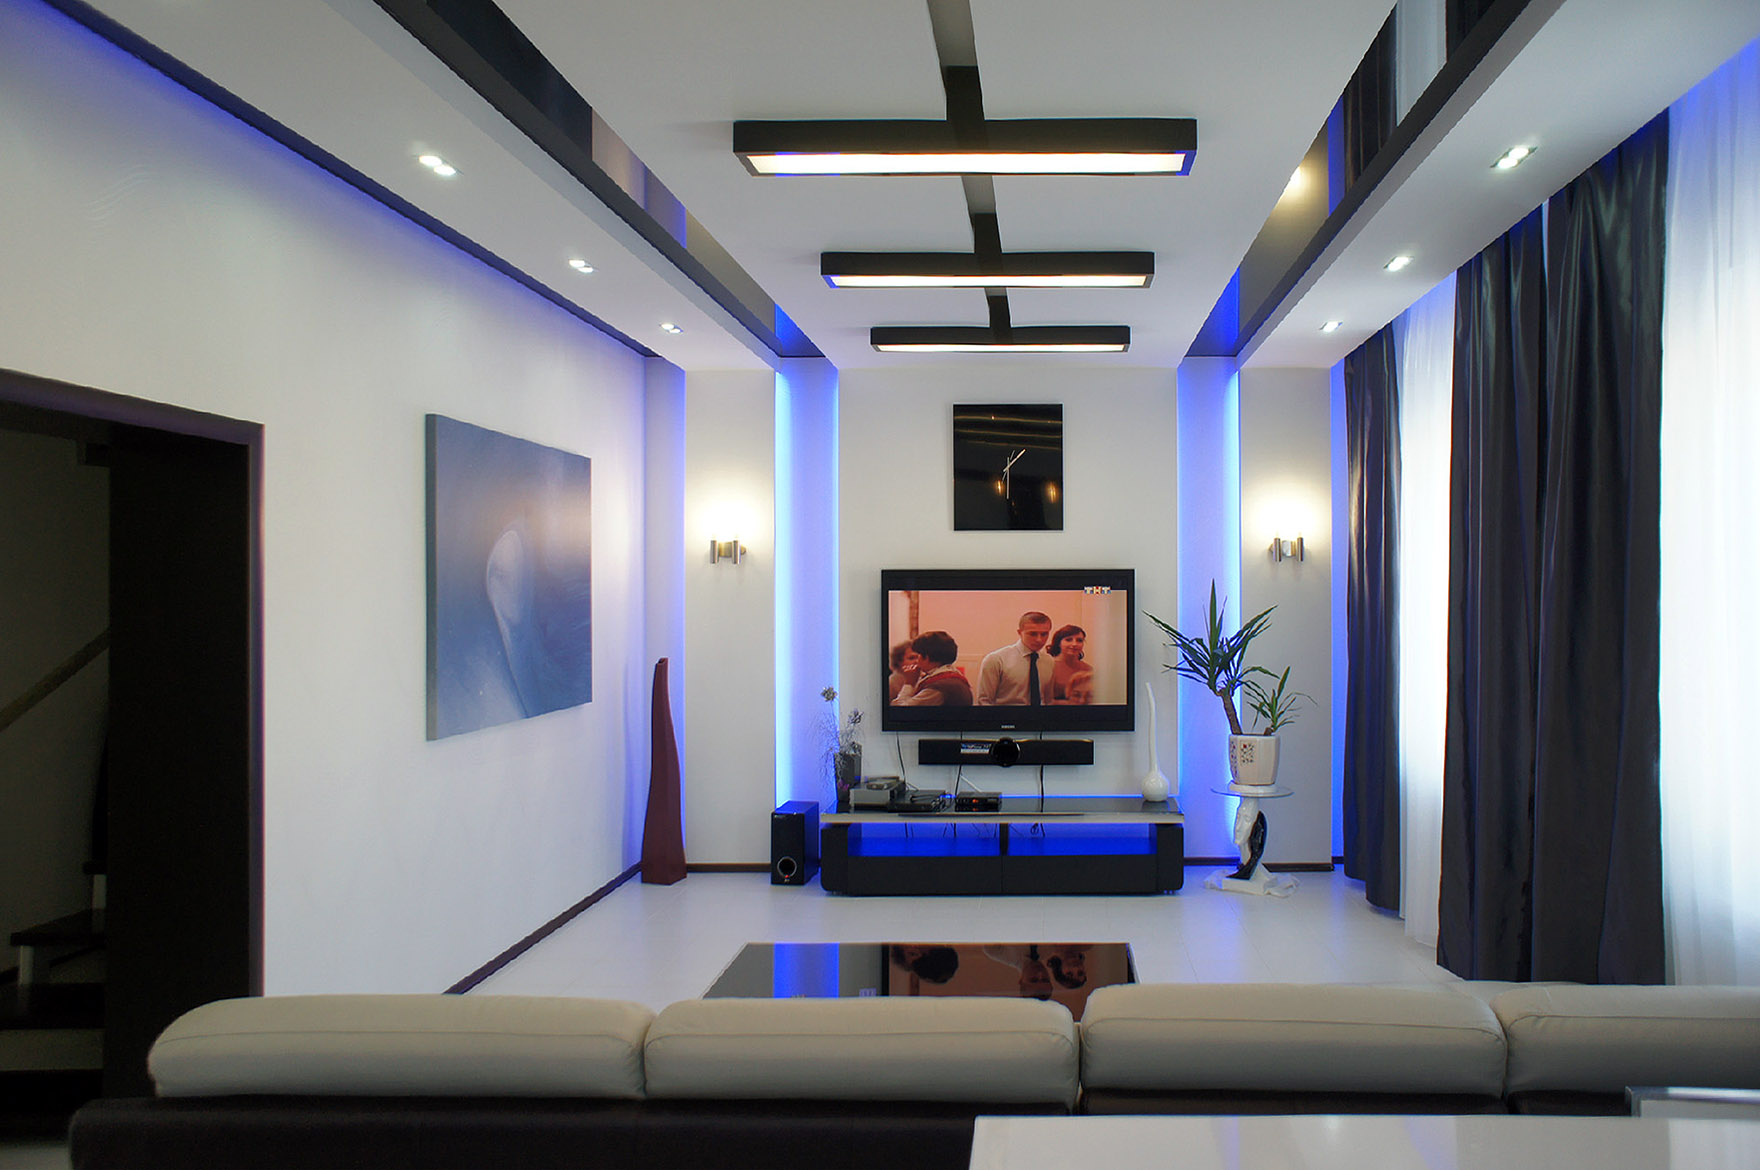 LED lighting of rooms in the apartment